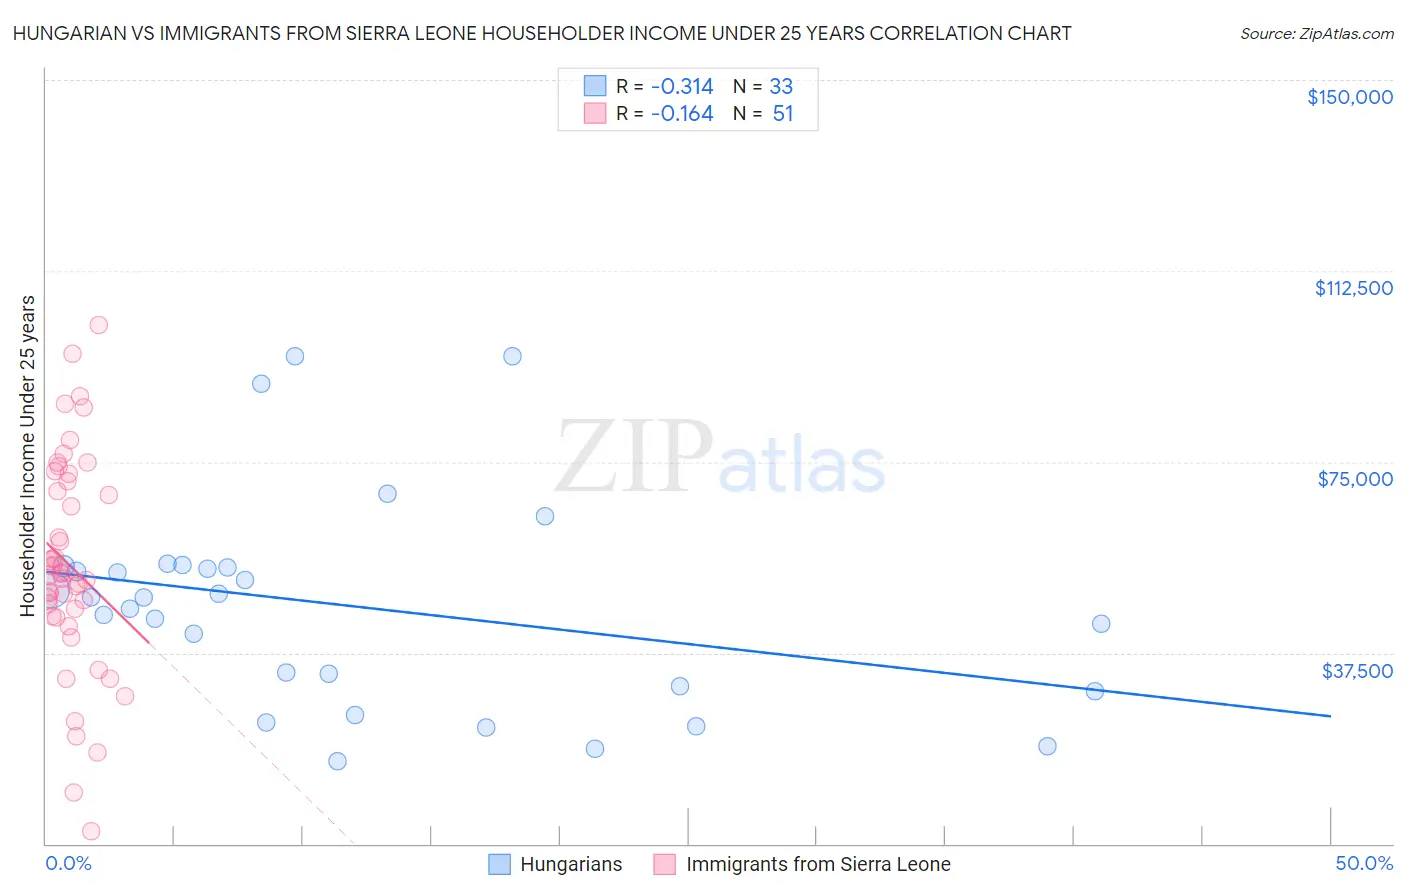 Hungarian vs Immigrants from Sierra Leone Householder Income Under 25 years